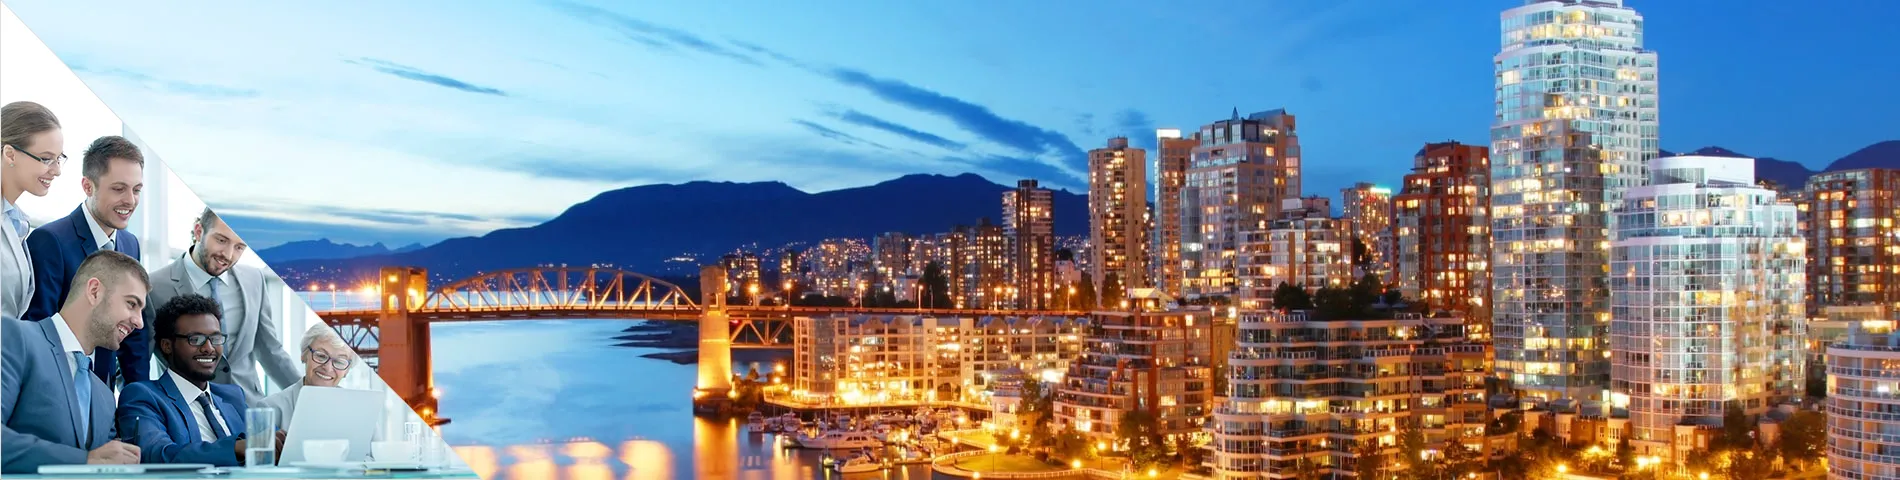 Vancouver - Business Gruppe